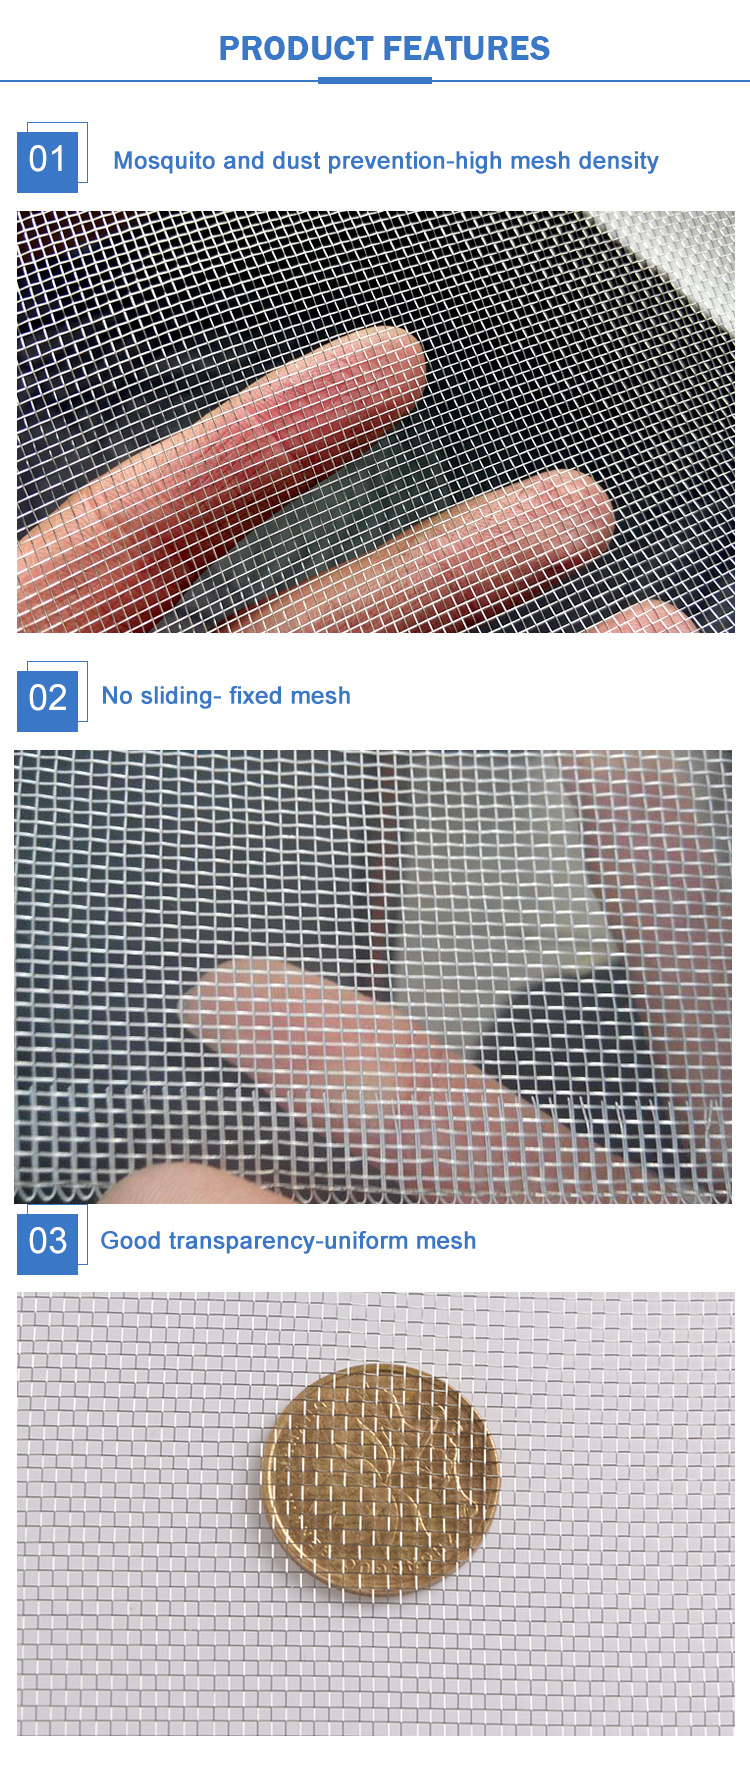 China Home Decoration Product Anti-Mosquito Aluminum Insect Window Screen